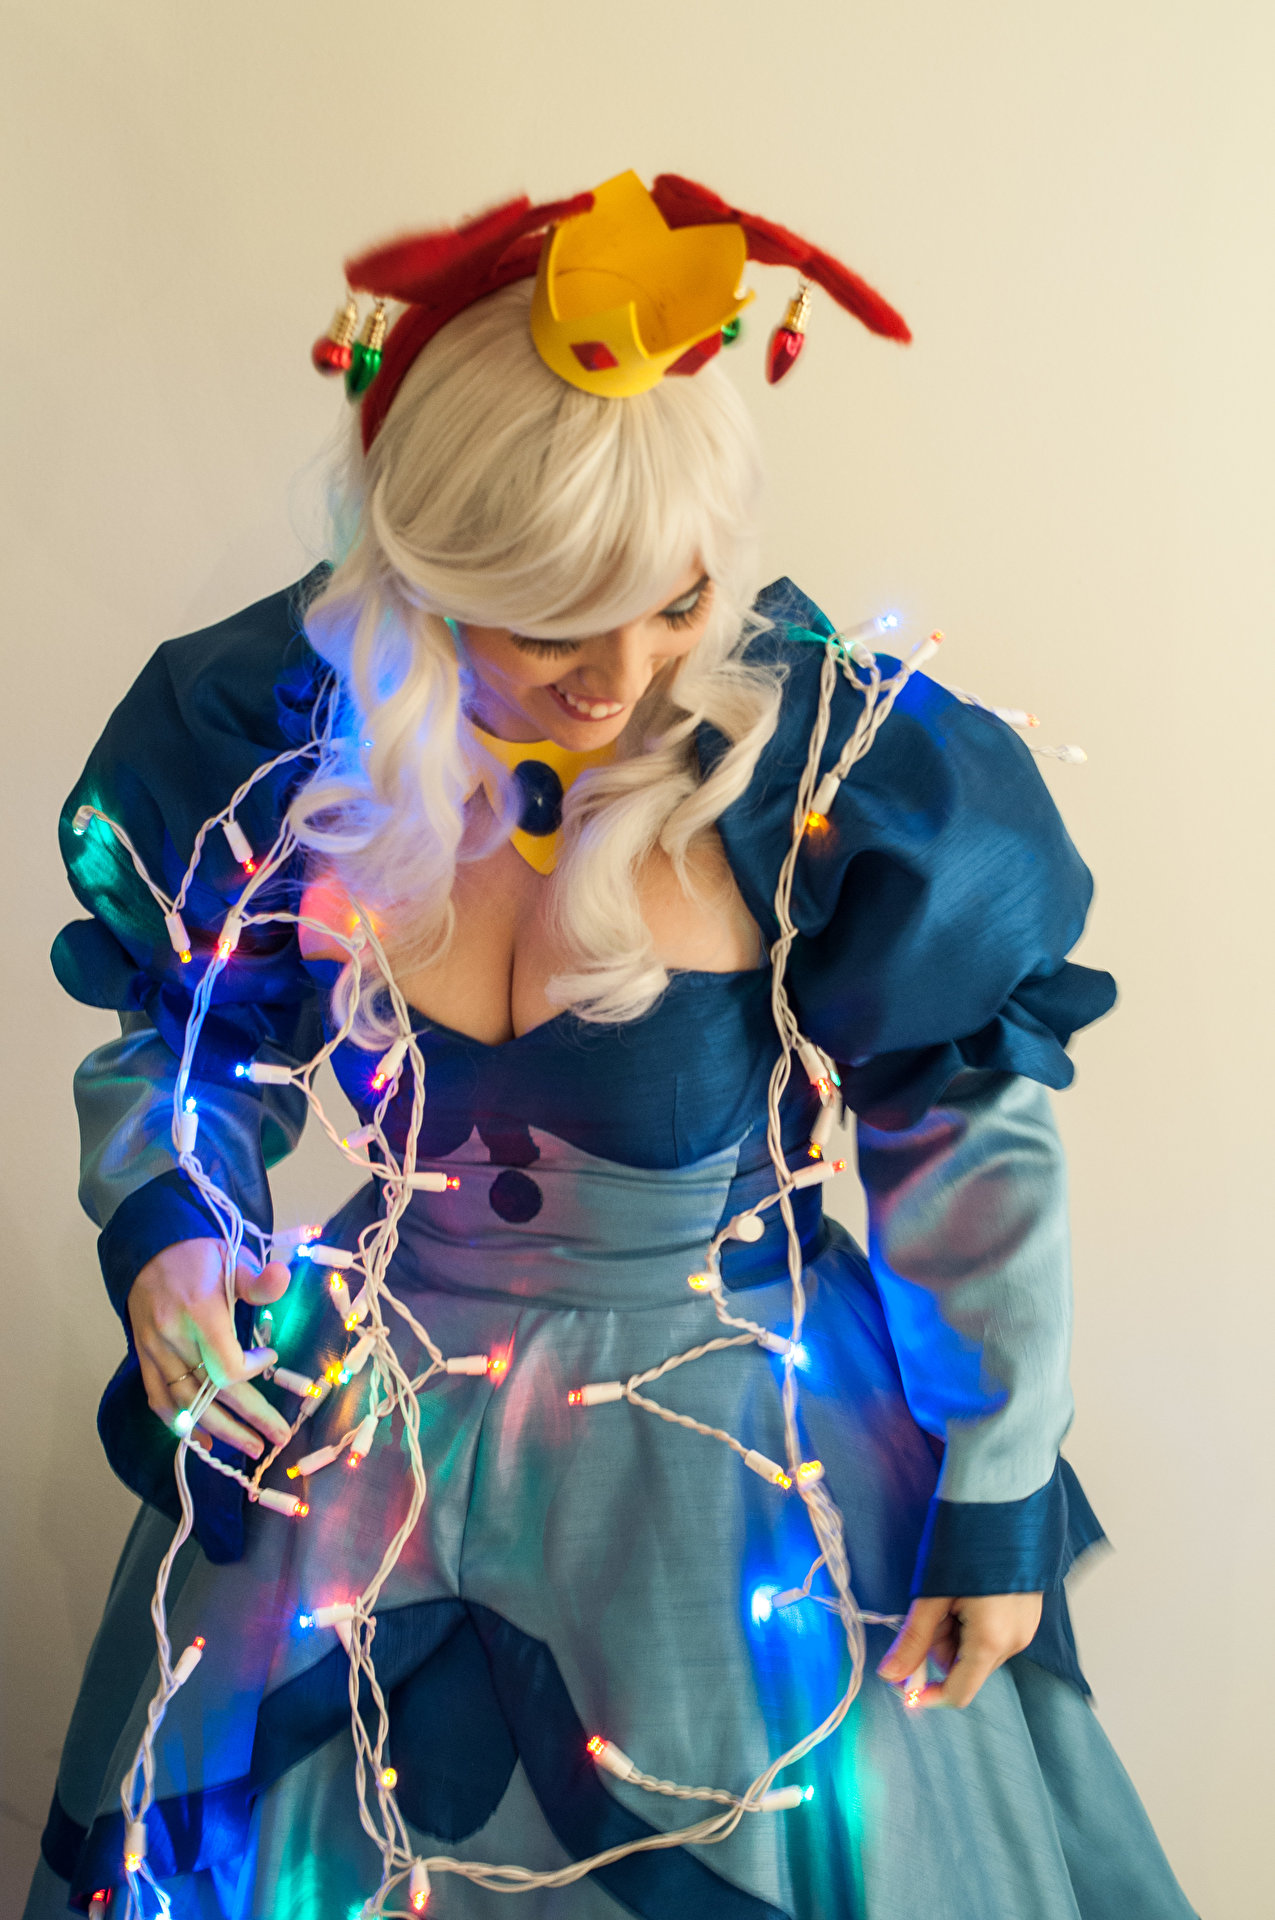 Cospix.net photo featuring Madster Cosplay and Photography